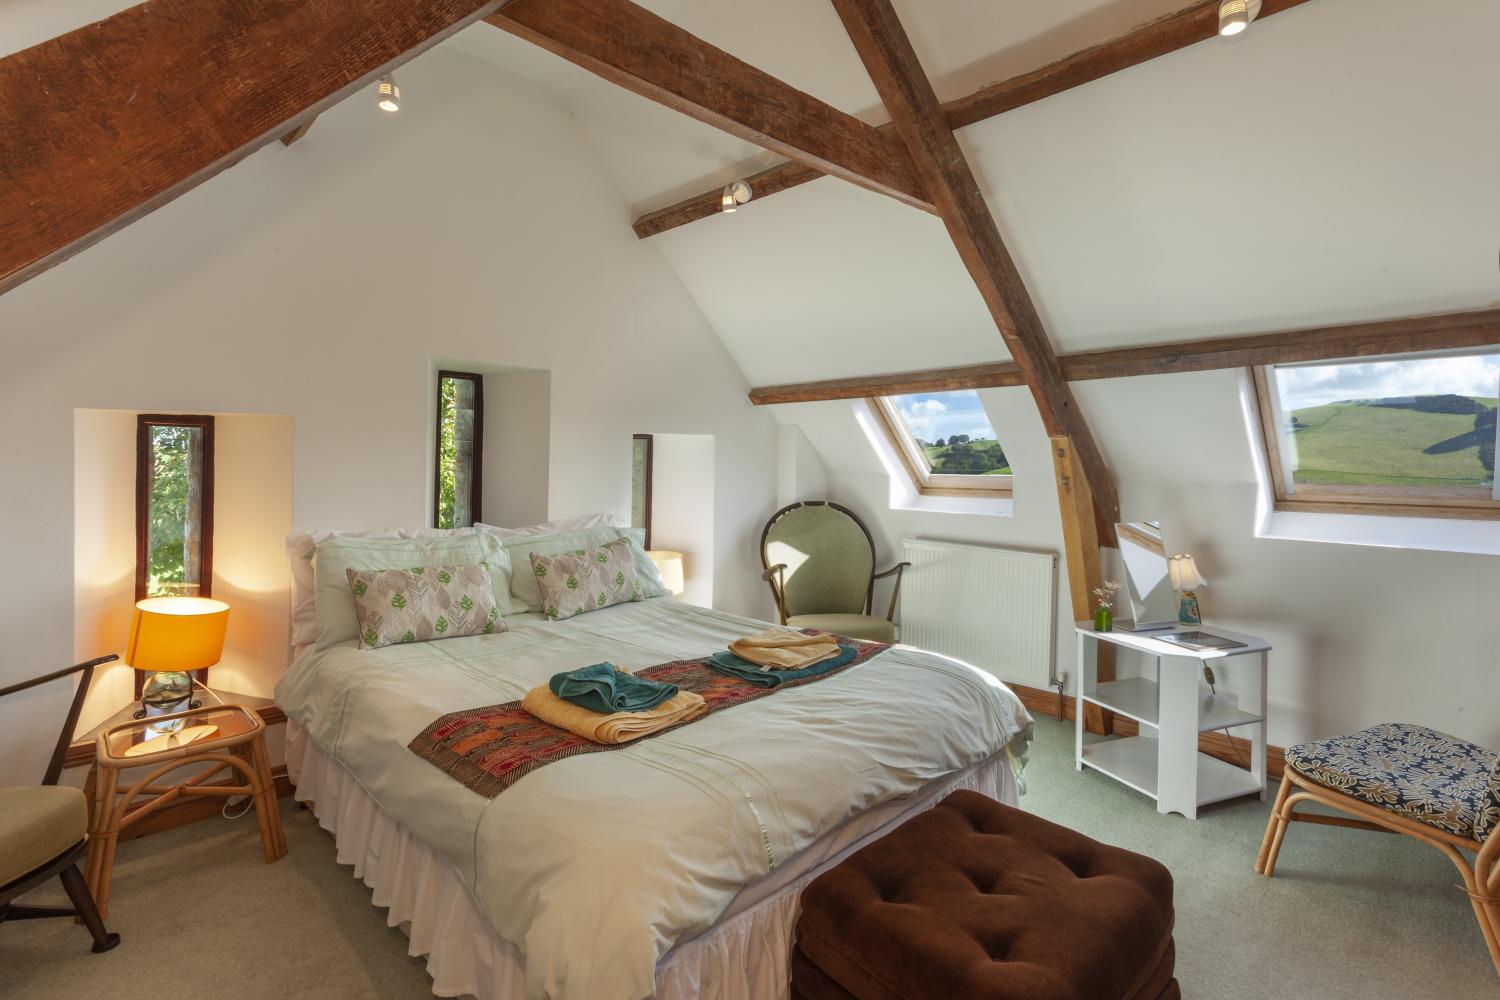 Double bed at Putham Barn